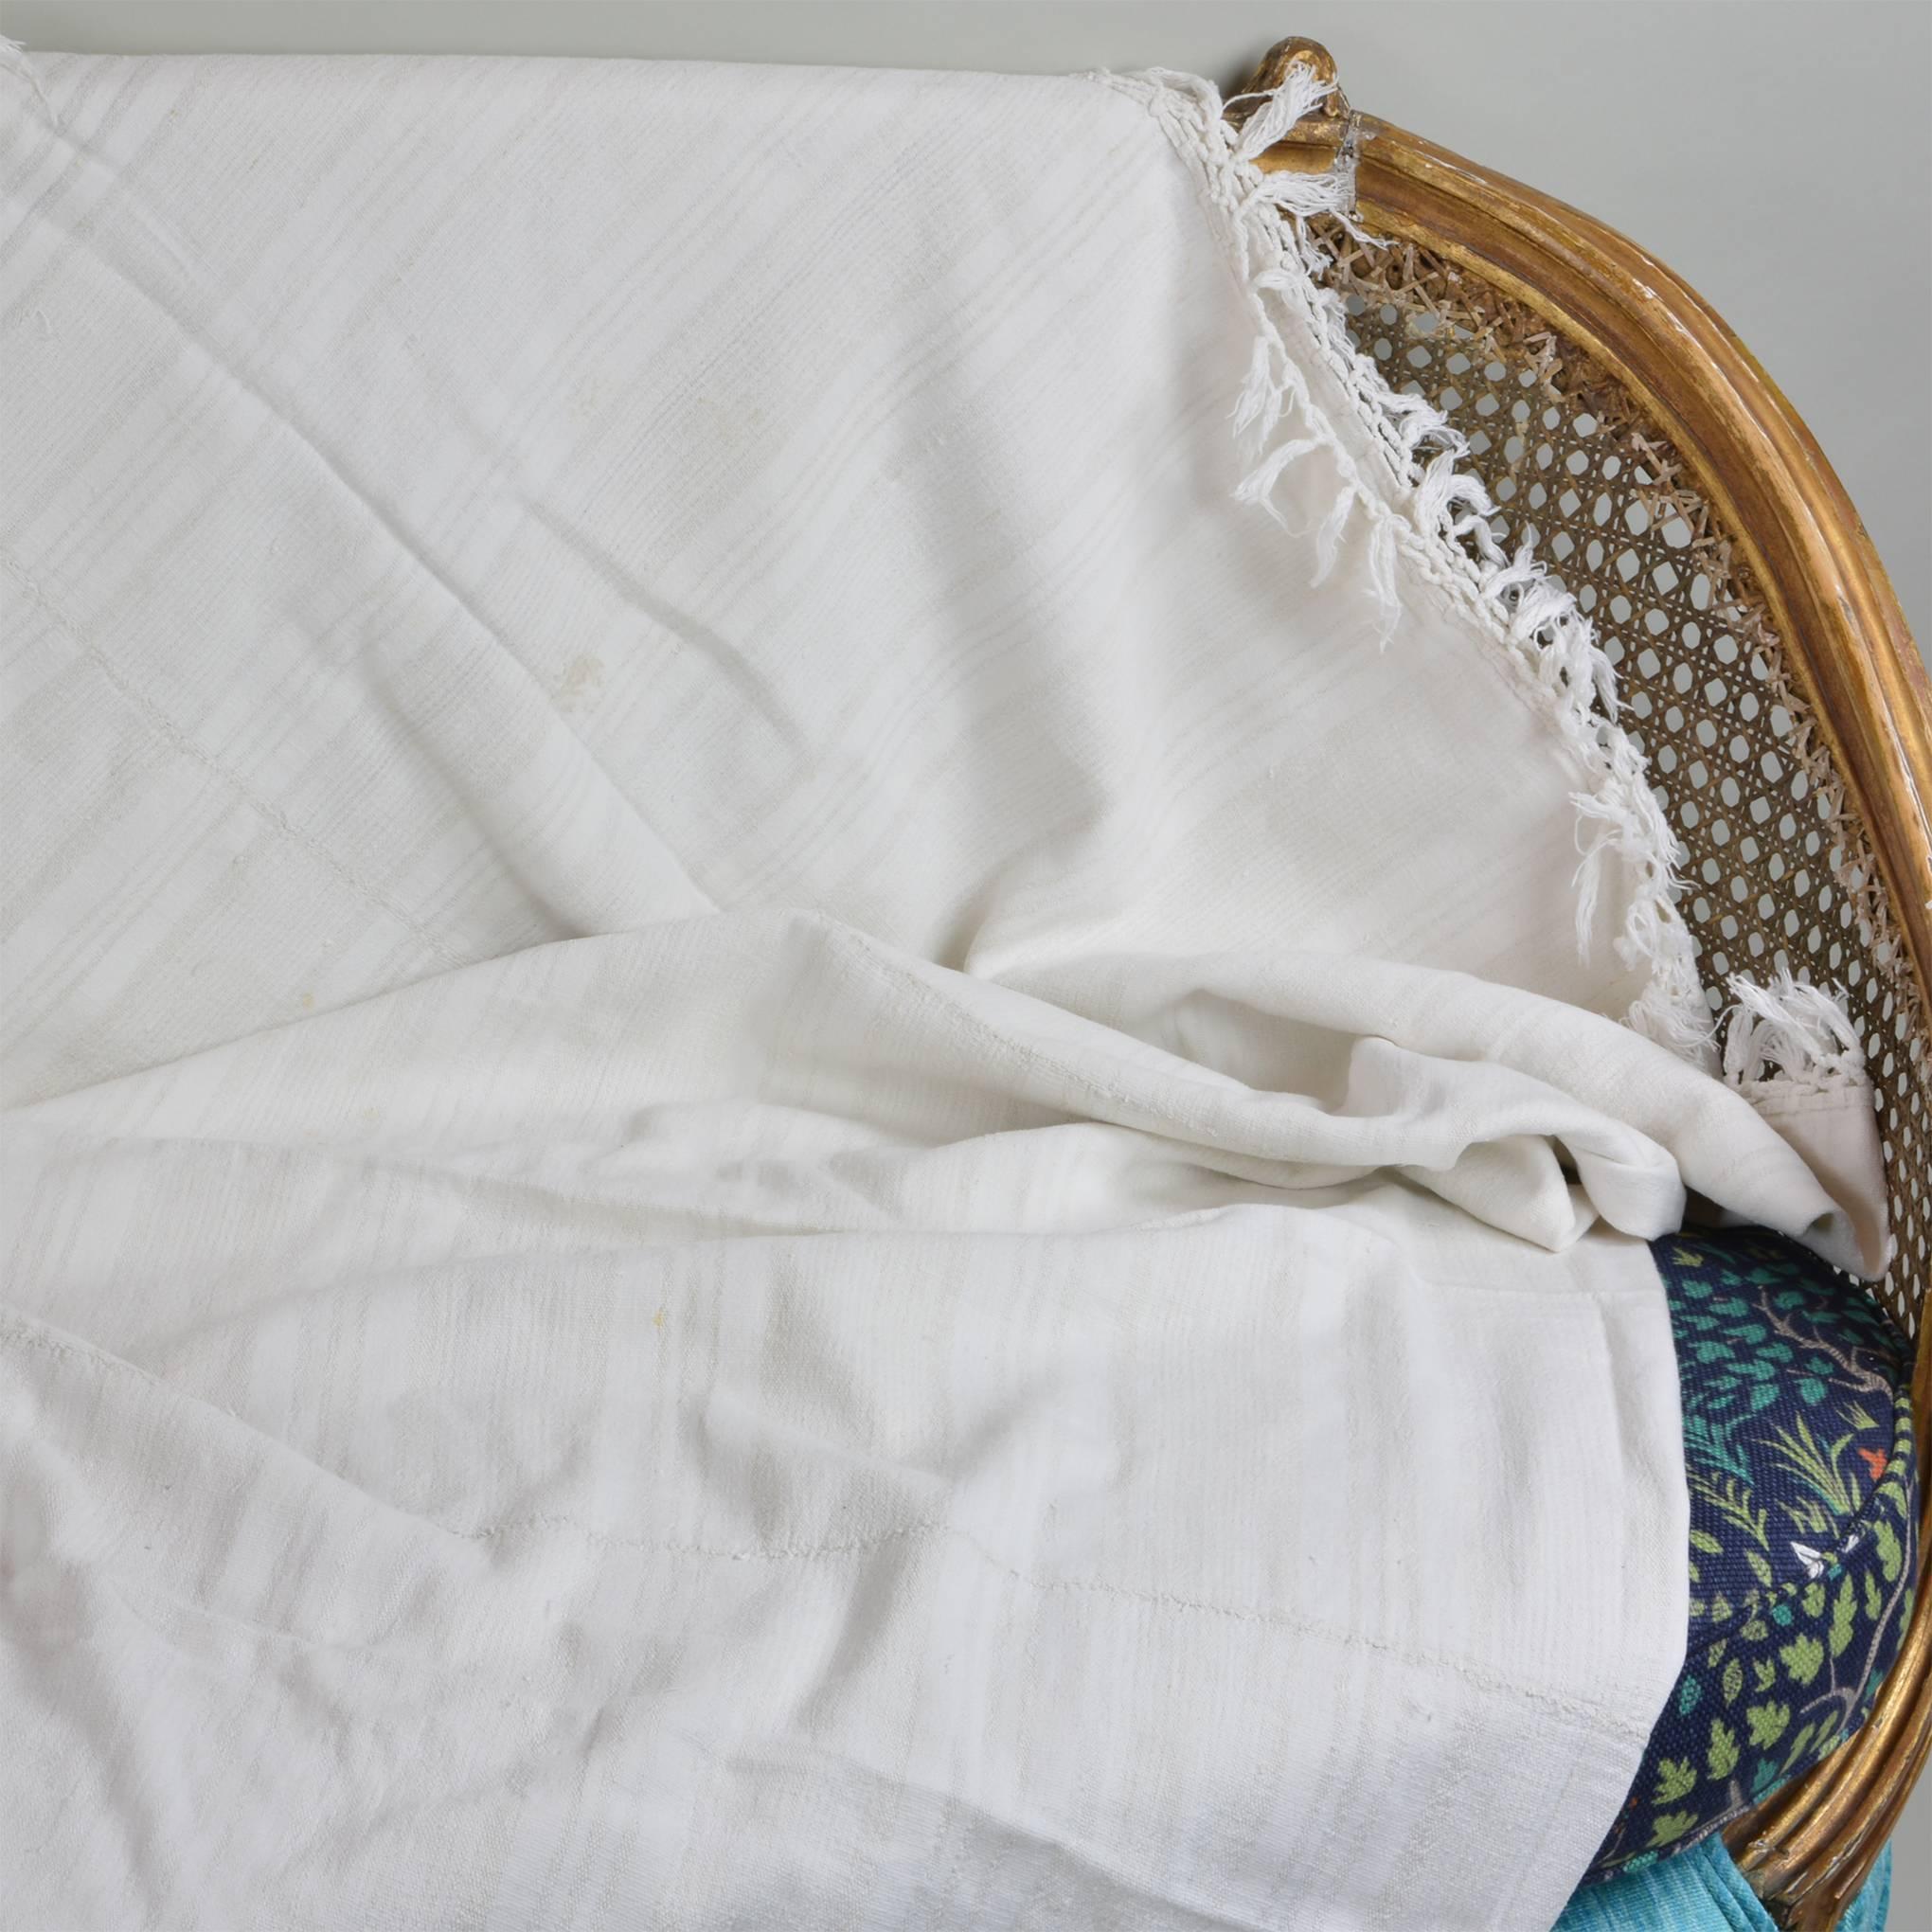 Super soft handwoven fabric was designed at the time as a bedspread.  It is lightweight and subtle cream color.  It was made on a smaller loom than the commercials ones used today.  As such, three pieces of fabric are woven together to get the